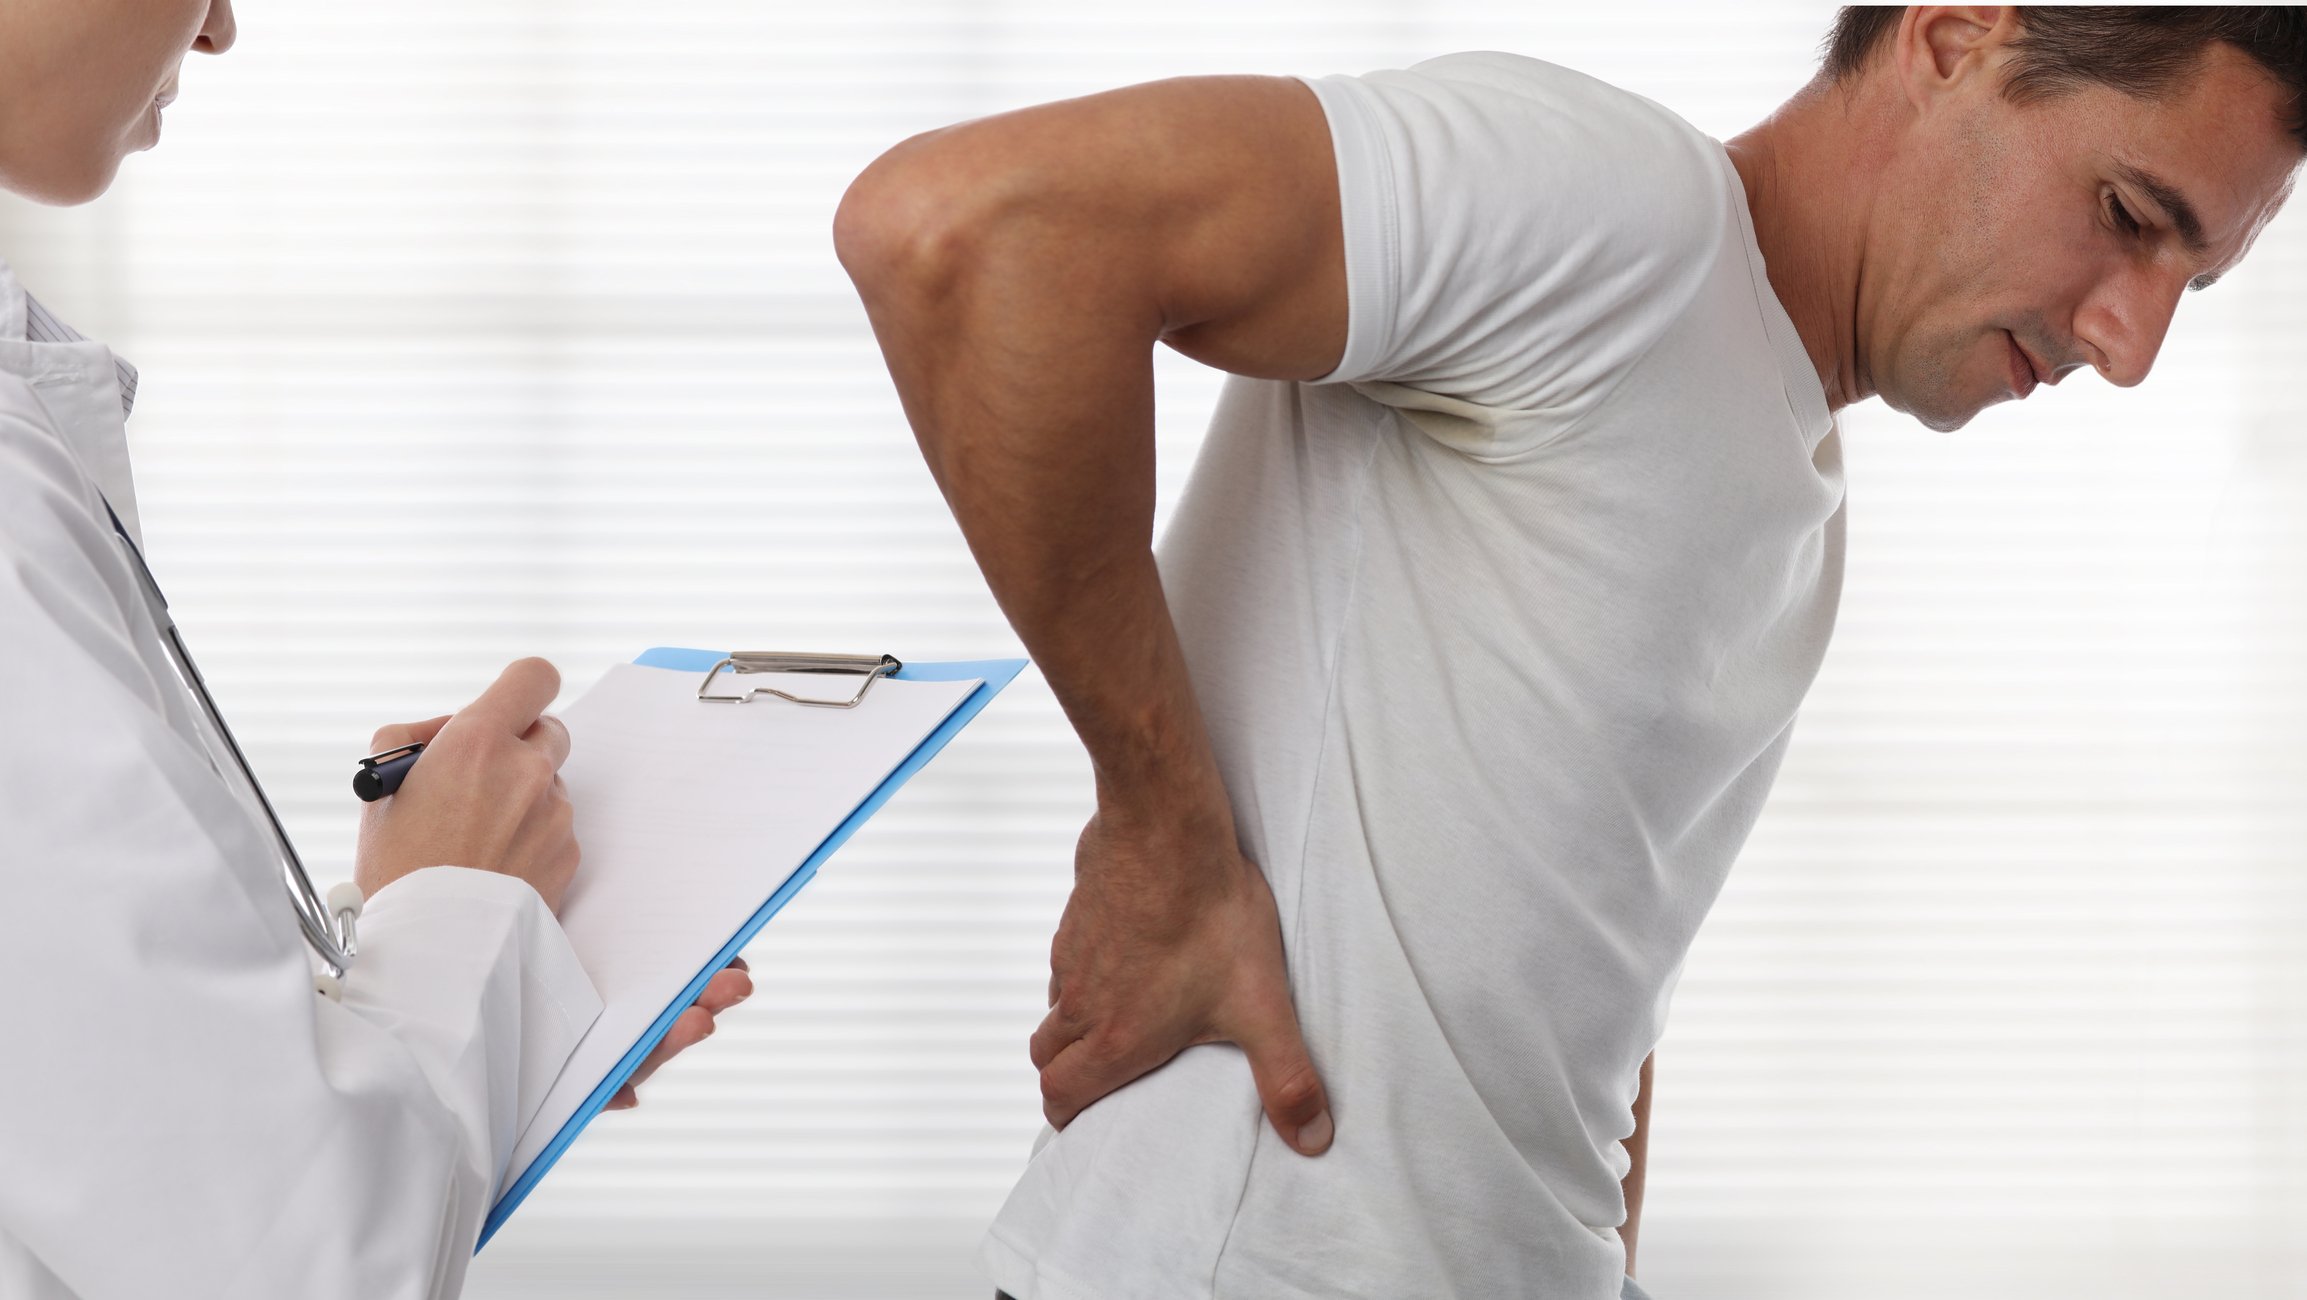 Back Pain: When to See a Doctor